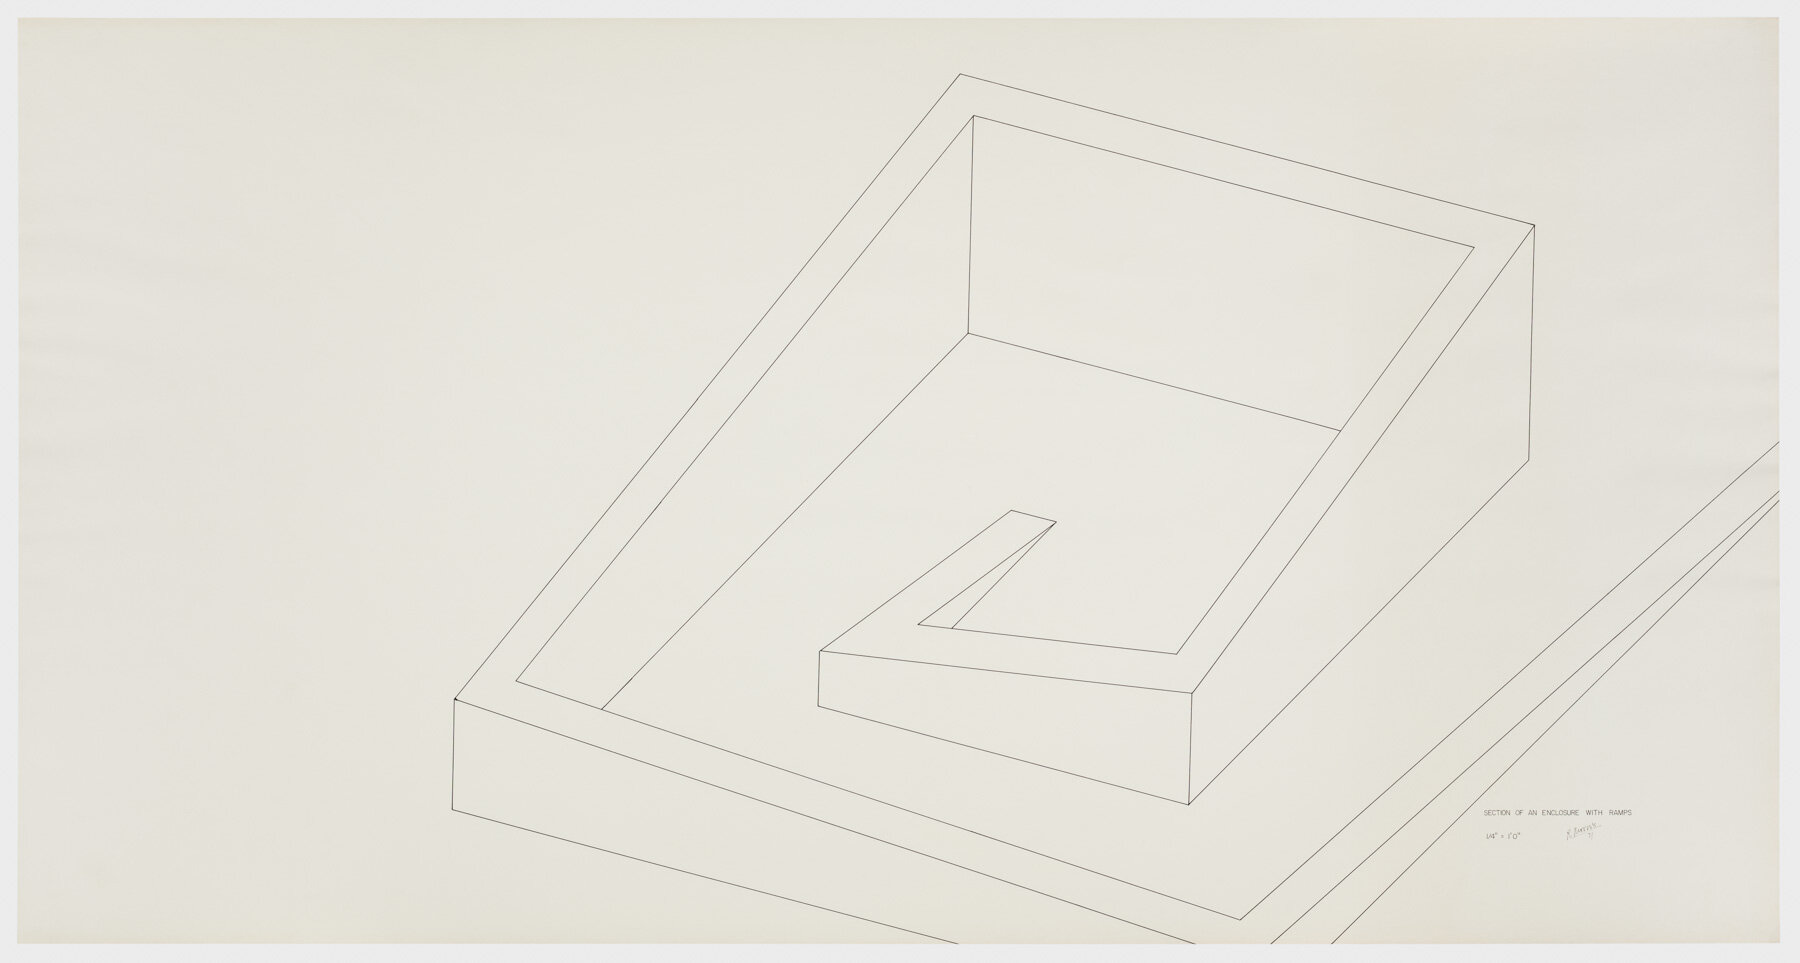  Robert Morris.  Section of an Enclosure with Ramps,  1971. Ink on paper, 42 ¼ x 80 ½ in. (107 x 204 cm). Estate of Robert Morris, courtesy Castelli Gallery, New York. © 2019 The Estate of Robert Morris / Artists Rights Society (ARS), New York. Photo